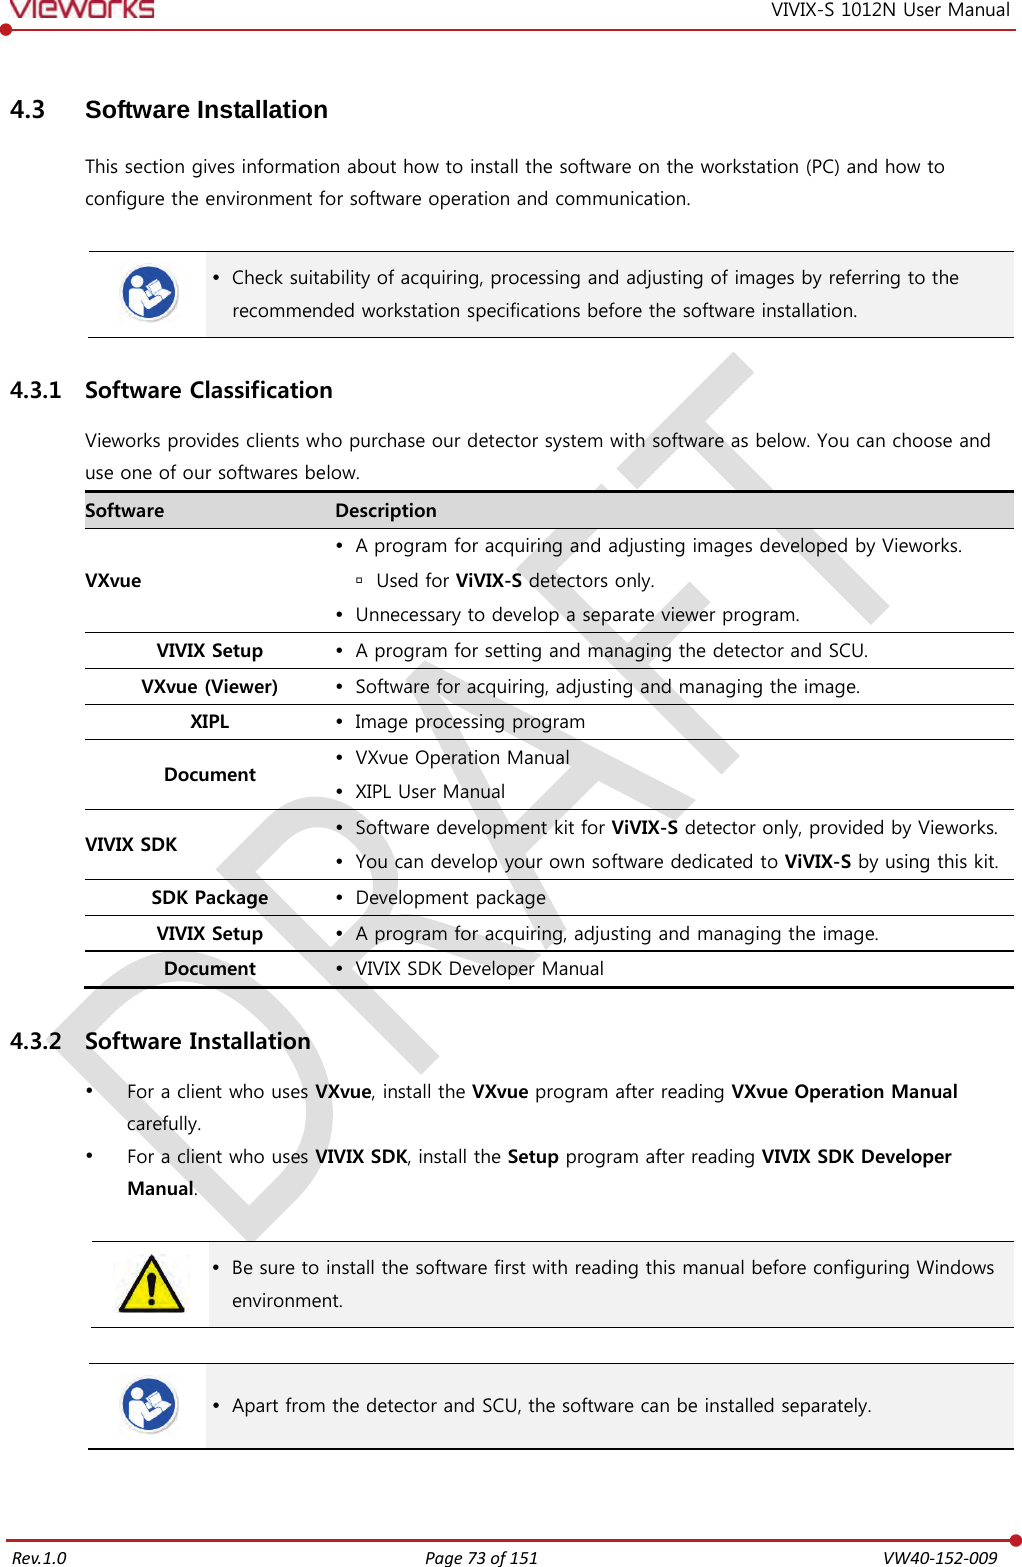   Rev.1.0 Page 73 of 151  VW40-152-009 VIVIX-S 1012N User Manual 4.3 Software Installation This section gives information about how to install the software on the workstation (PC) and how to configure the environment for software operation and communication.    Check suitability of acquiring, processing and adjusting of images by referring to the recommended workstation specifications before the software installation. 4.3.1 Software Classification Vieworks provides clients who purchase our detector system with software as below. You can choose and use one of our softwares below. Software Description VXvue  A program for acquiring and adjusting images developed by Vieworks.  Used for ViVIX-S detectors only.  Unnecessary to develop a separate viewer program. VIVIX Setup  A program for setting and managing the detector and SCU. VXvue (Viewer)  Software for acquiring, adjusting and managing the image. XIPL  Image processing program Document  VXvue Operation Manual  XIPL User Manual VIVIX SDK  Software development kit for ViVIX-S detector only, provided by Vieworks.  You can develop your own software dedicated to ViVIX-S by using this kit. SDK Package  Development package VIVIX Setup  A program for acquiring, adjusting and managing the image. Document  VIVIX SDK Developer Manual 4.3.2 Software Installation  For a client who uses VXvue, install the VXvue program after reading VXvue Operation Manual carefully.  For a client who uses VIVIX SDK, install the Setup program after reading VIVIX SDK Developer Manual.    Be sure to install the software first with reading this manual before configuring Windows environment.    Apart from the detector and SCU, the software can be installed separately.  